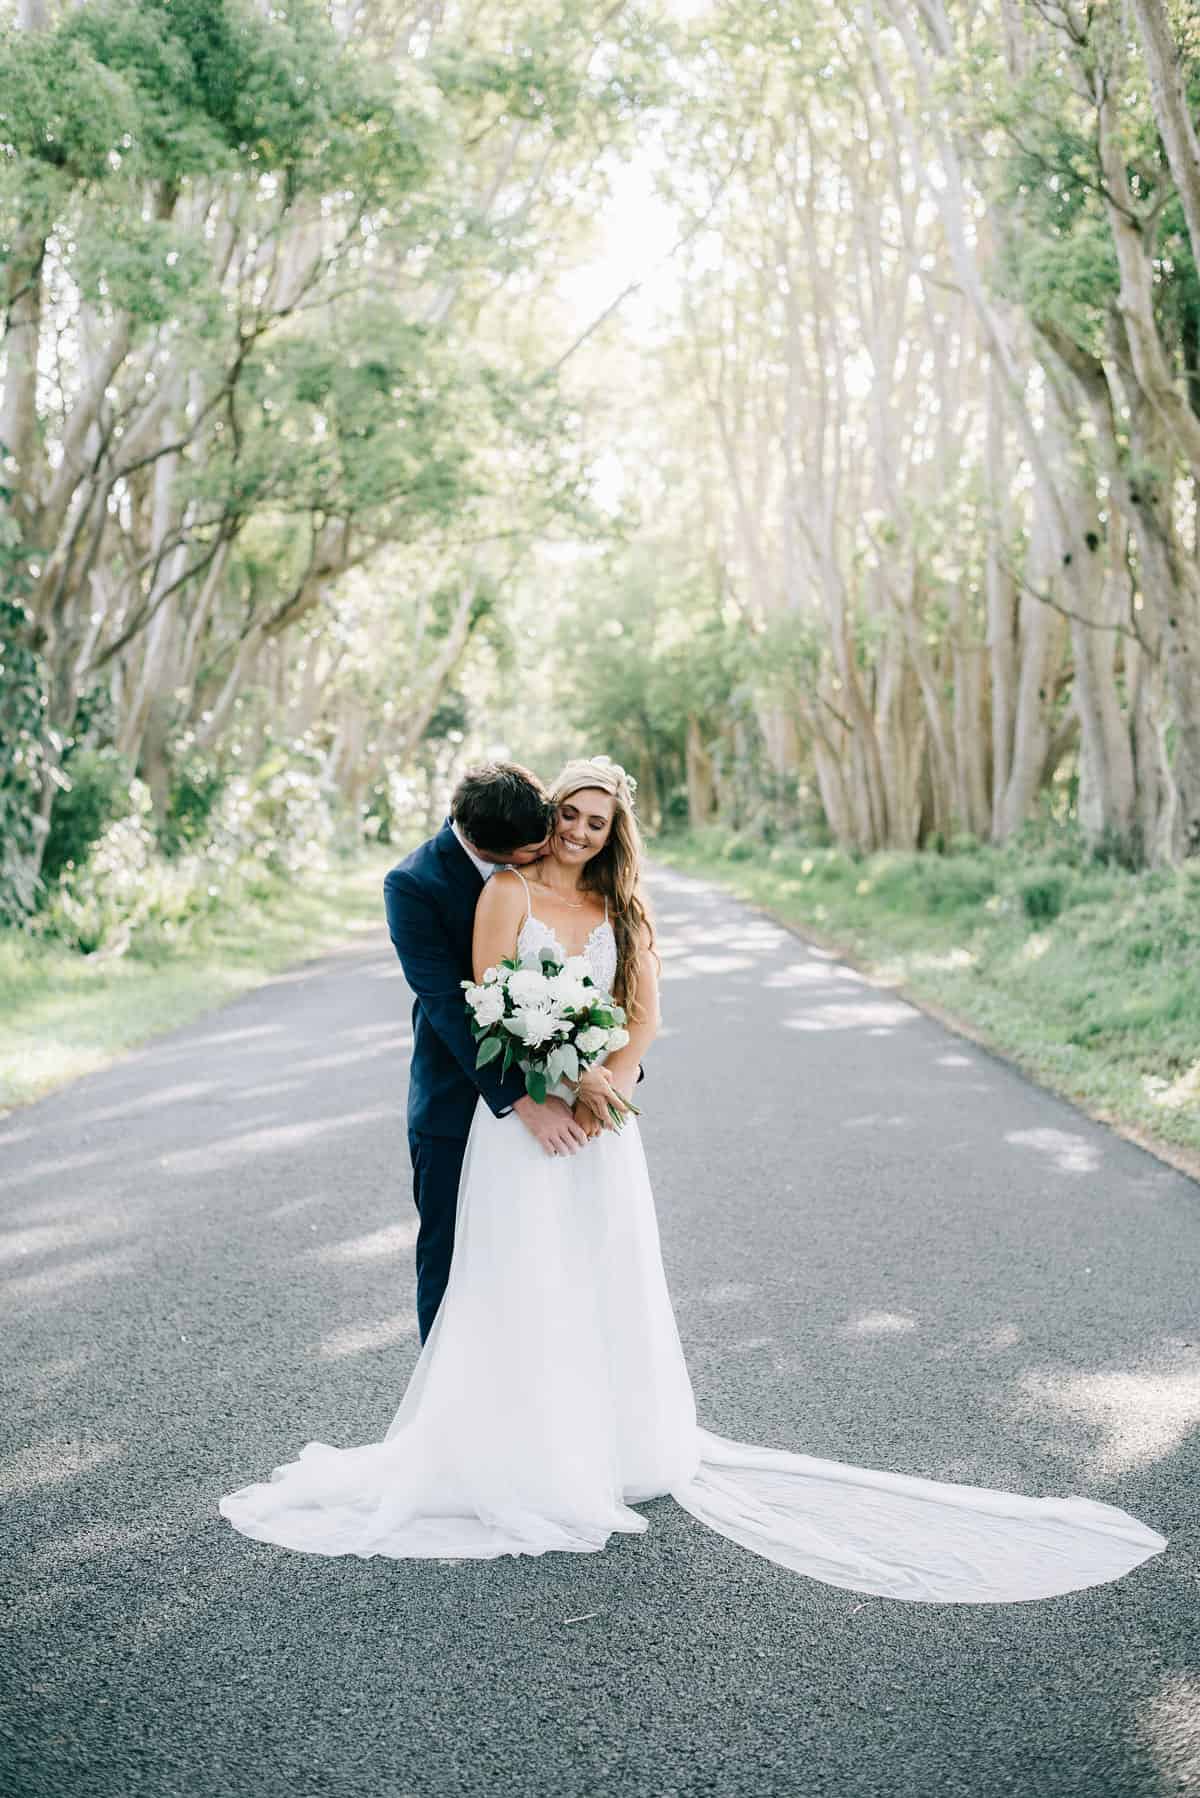 Sam and Connor's Kingscliff Wedding